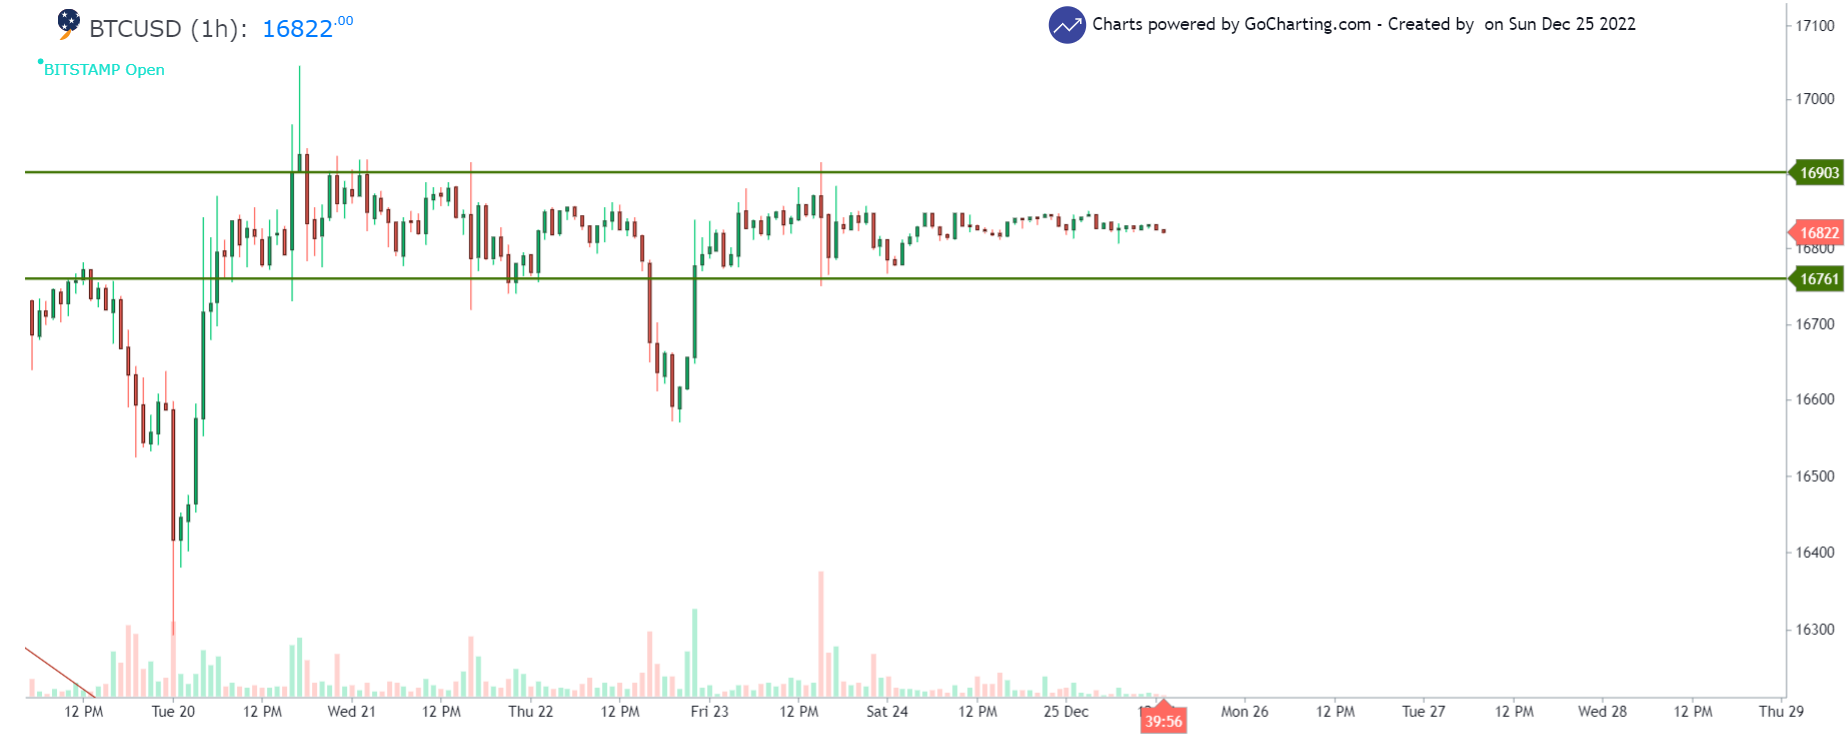 BTC/USD 1-hour chart showing Bitcoin's price action 